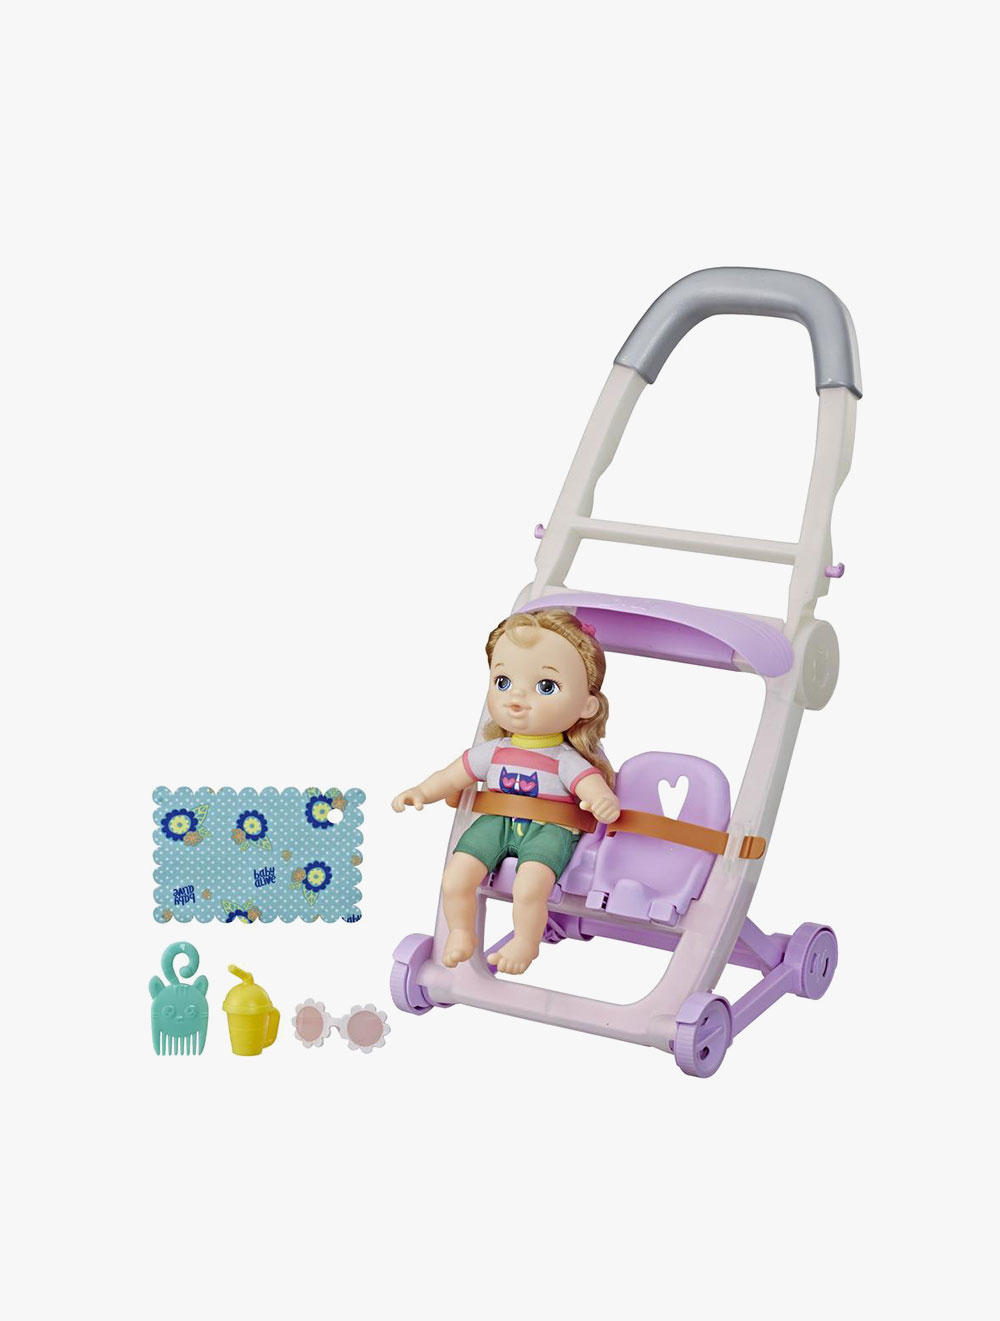 toys for babies that like to kick